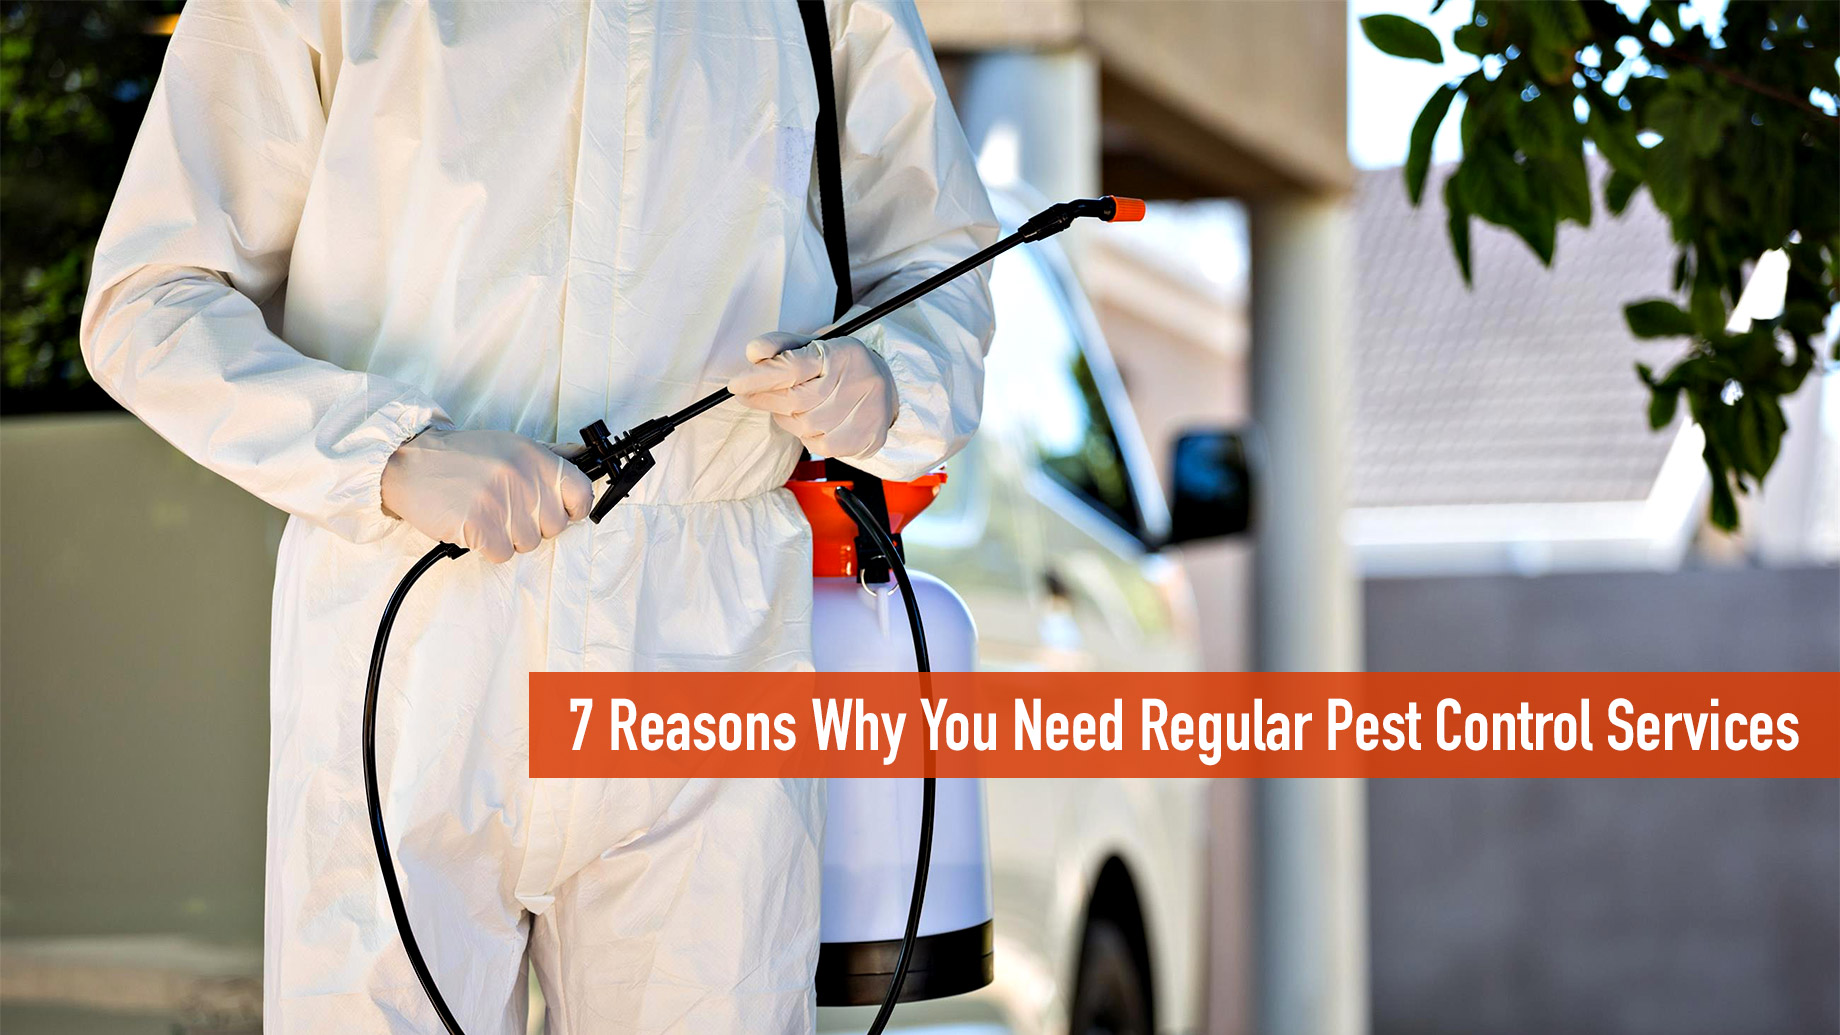 7 Reasons Why You Need Regular Pest Control Services